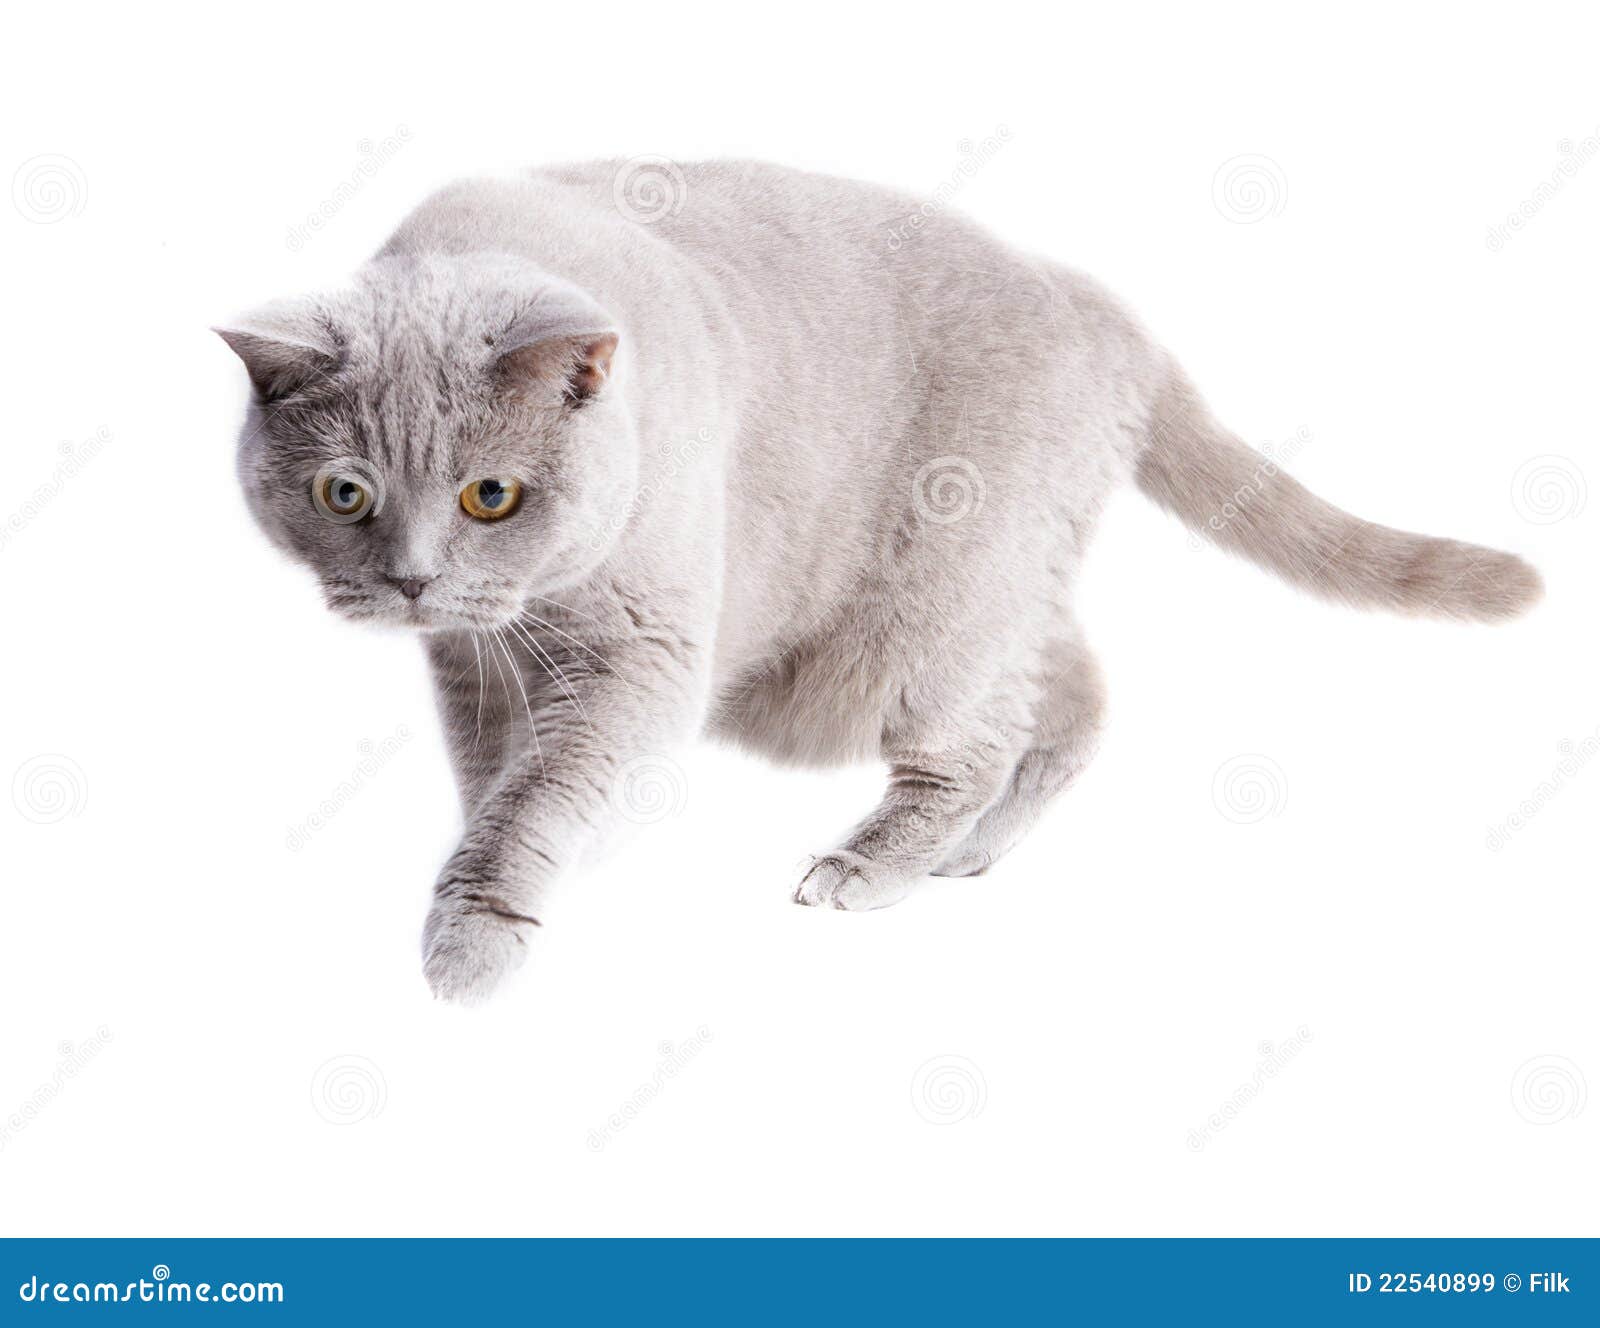 Sneaking cat stock image. Image of shorthair, claw ...